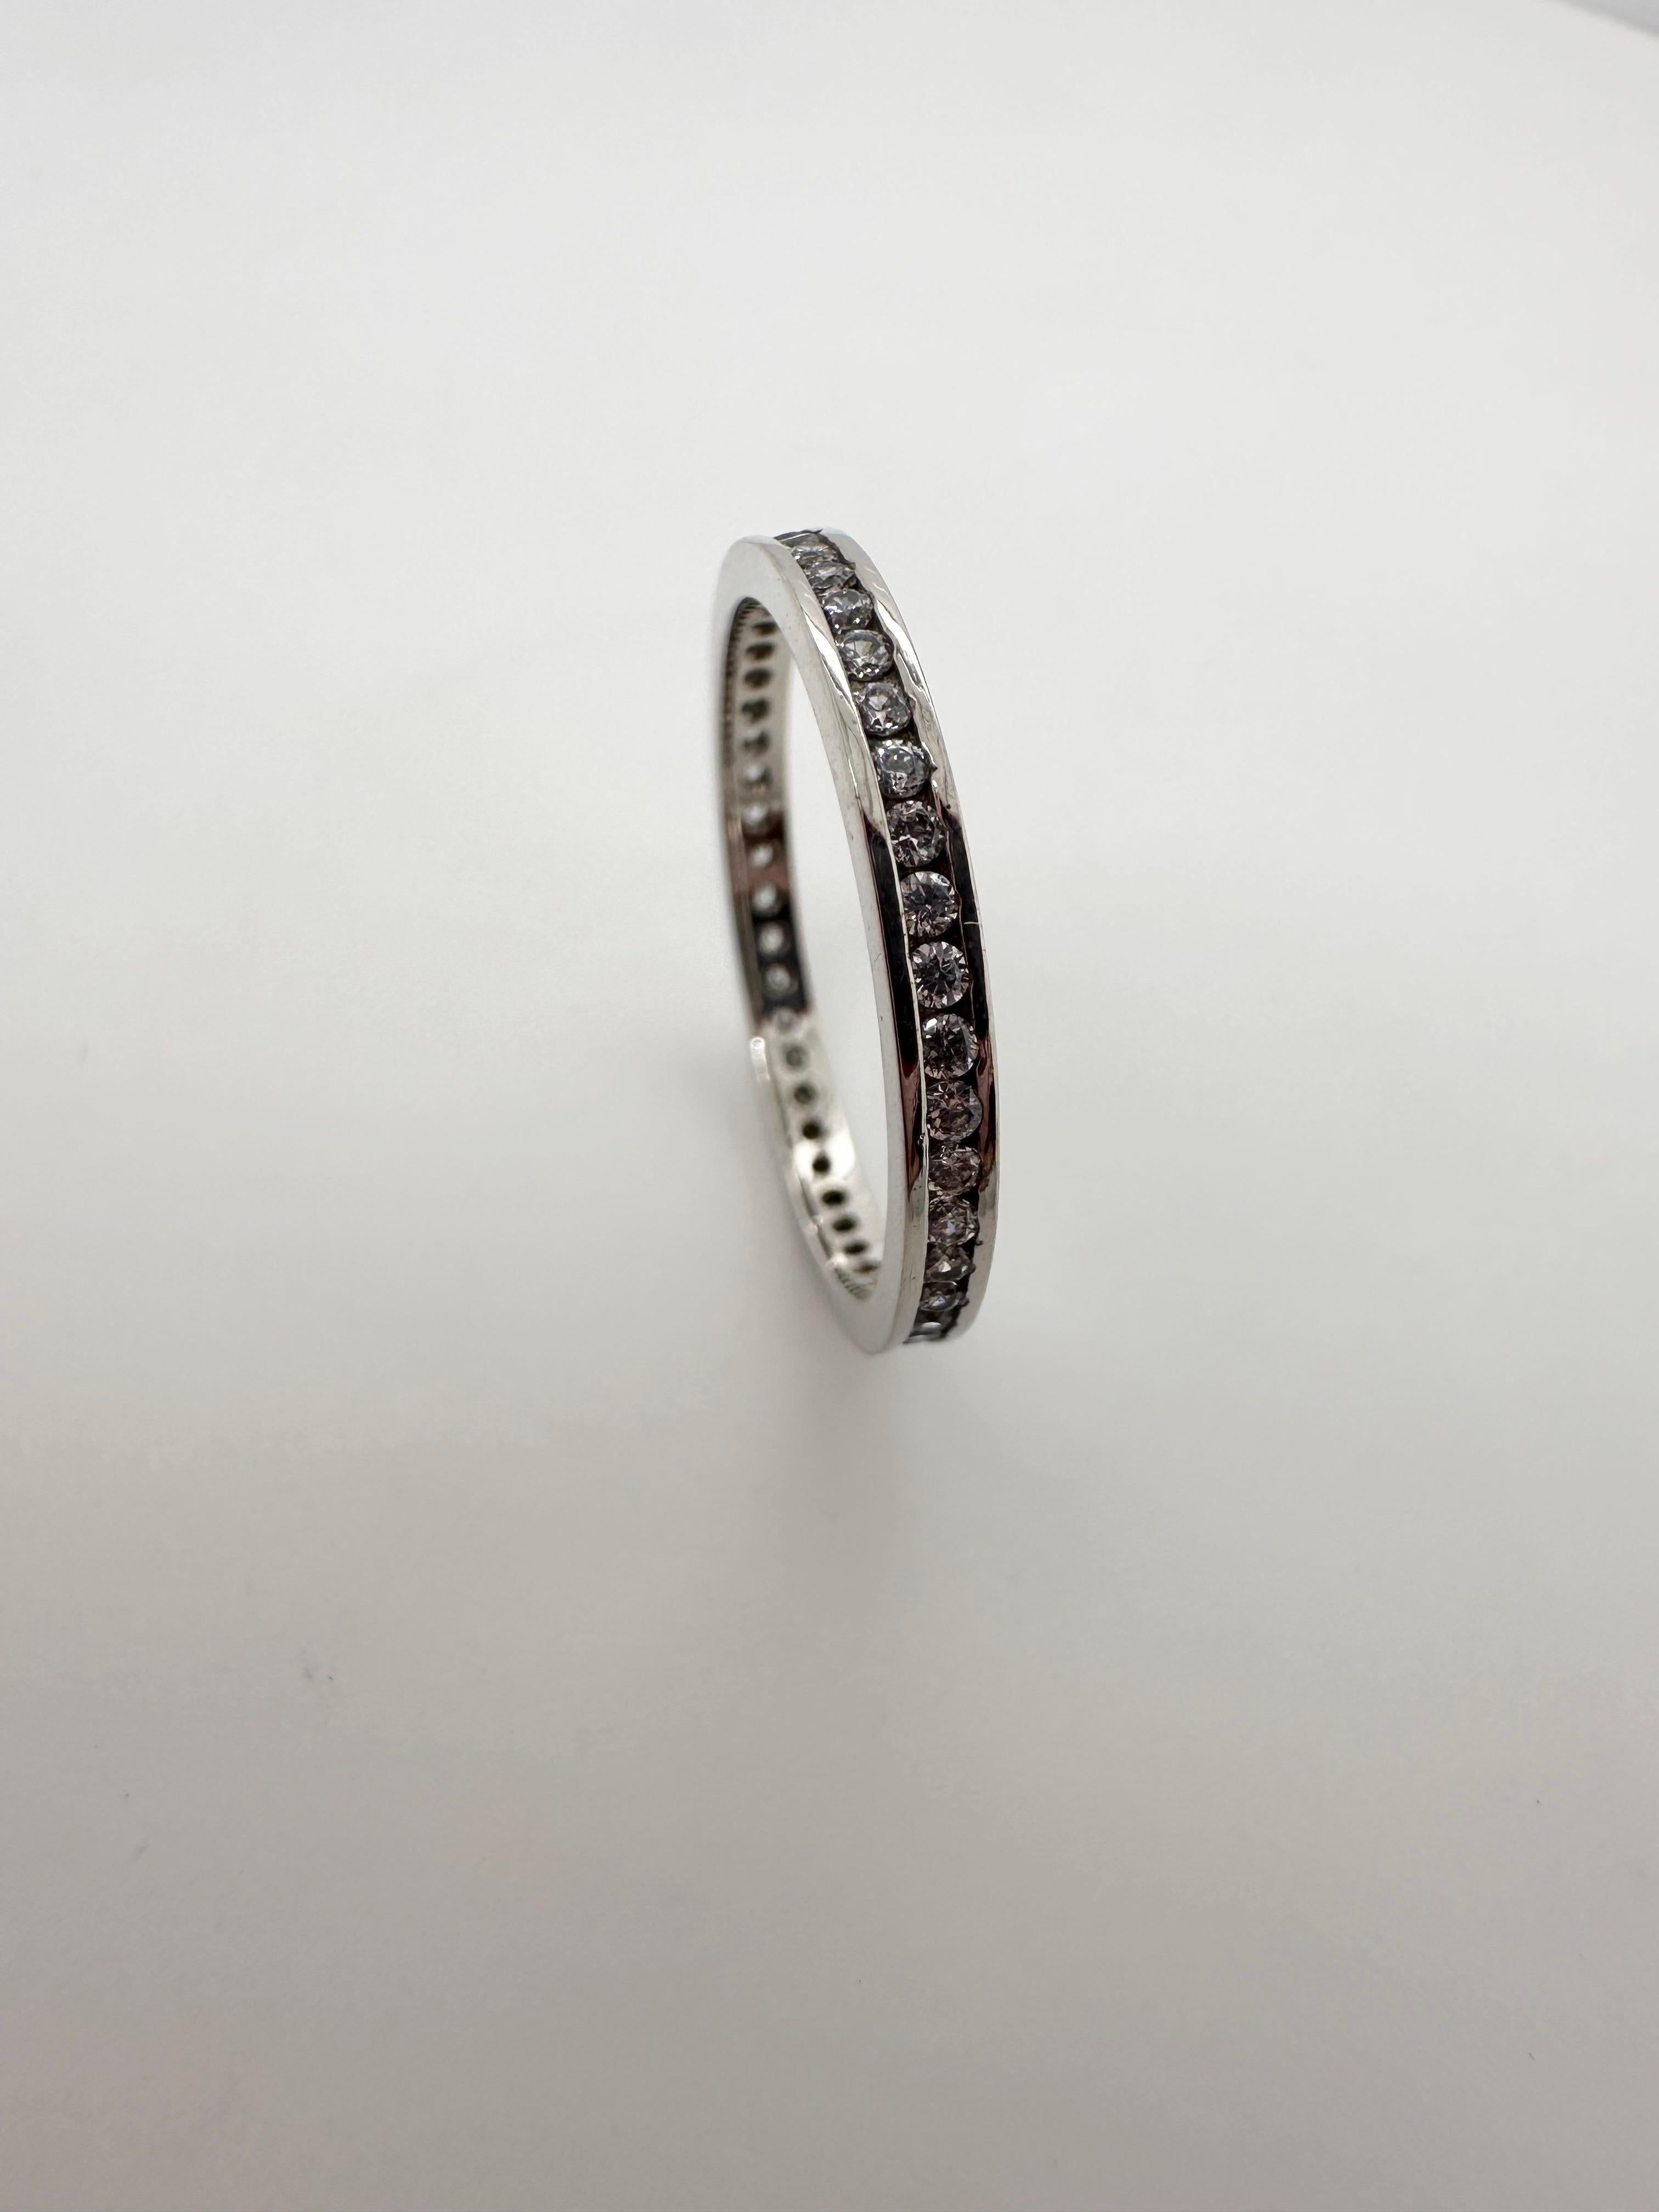 Round Cut Diamond wedding band 10KT white gold marriage ring stacking ring size 7.5 For Sale